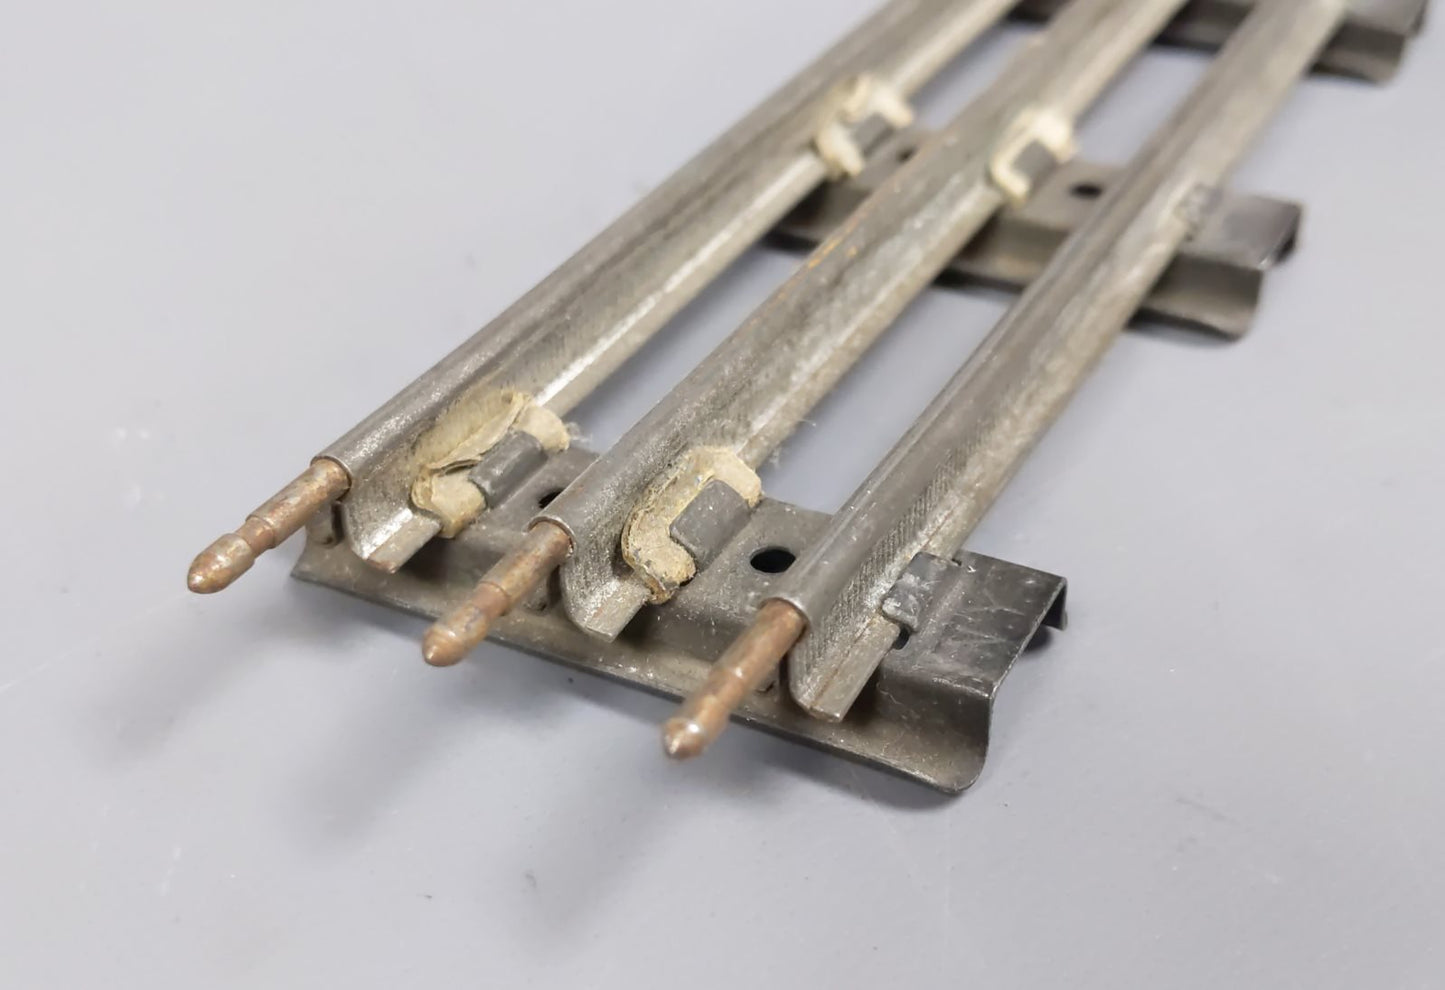 Lionel O Tubular Curved & Straight Track Sections [20+]